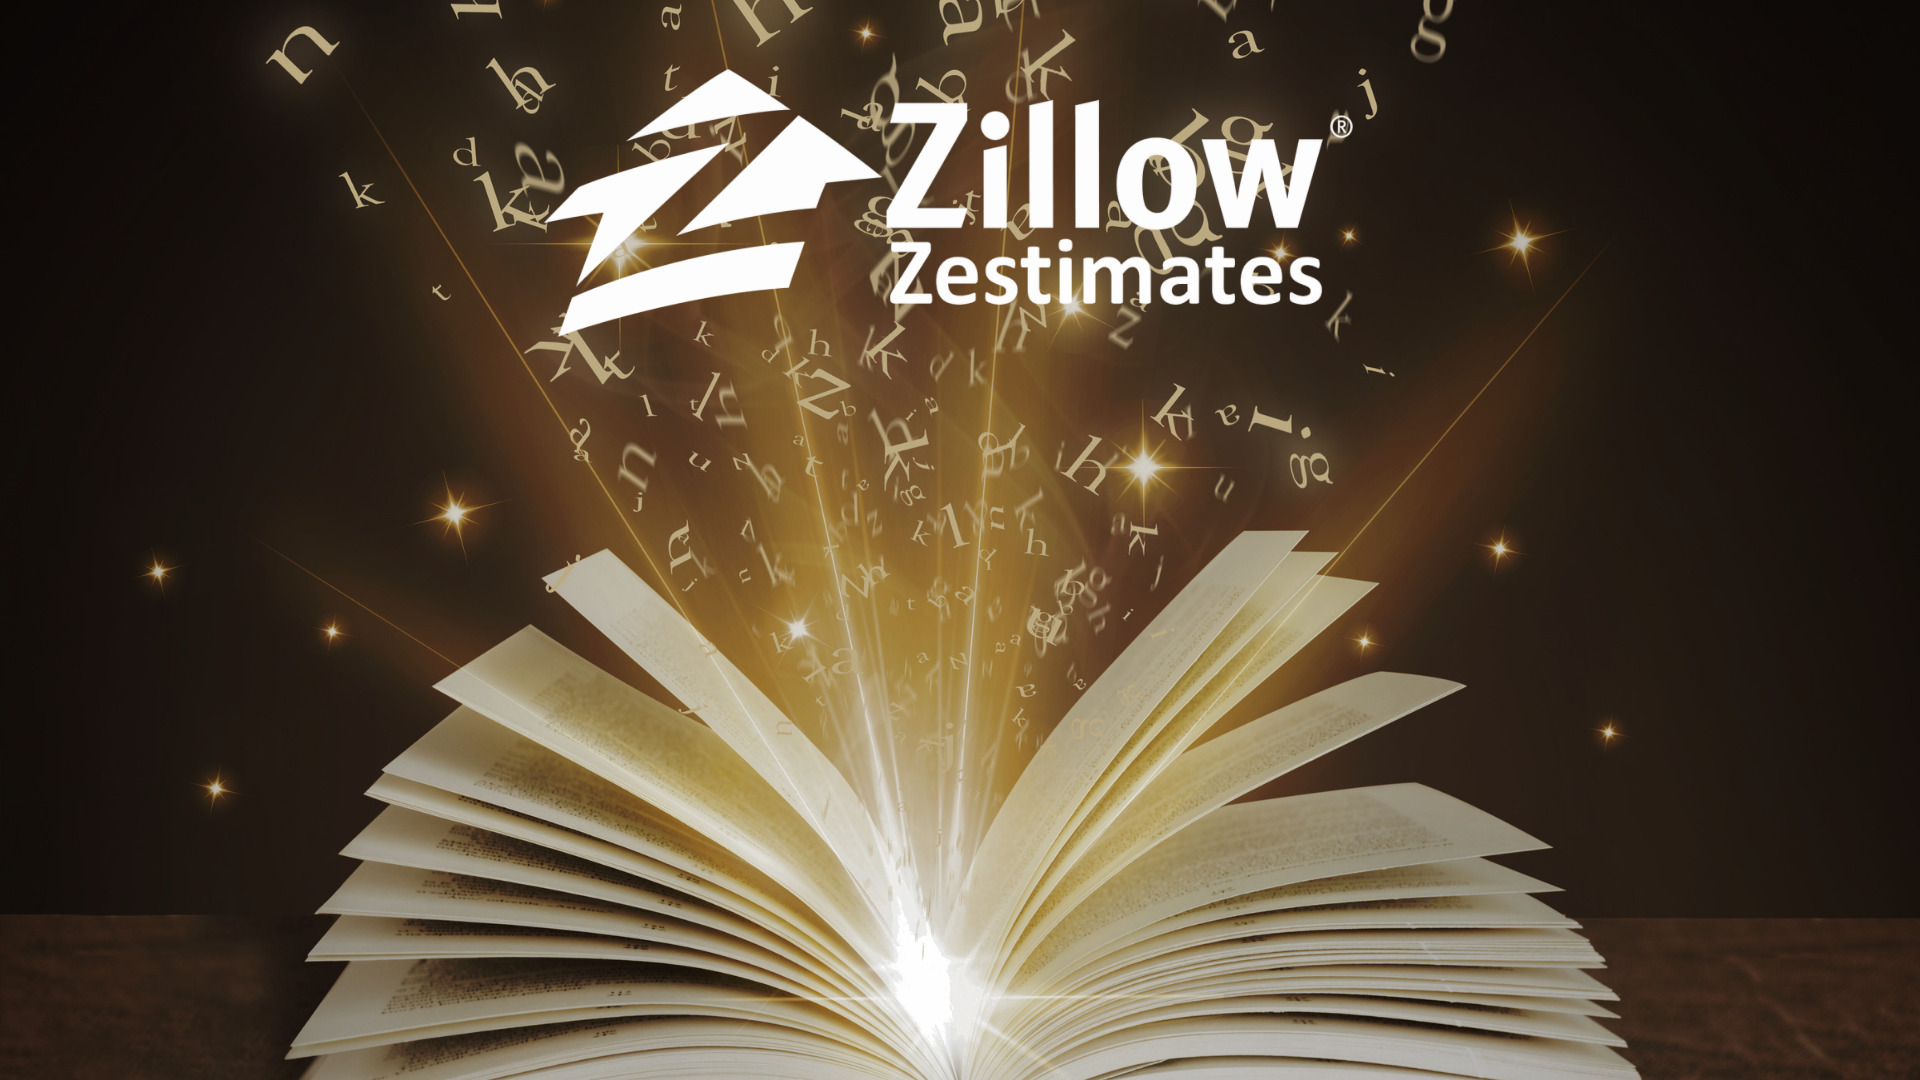 Zillow Zestimates: Decoding the Mystery